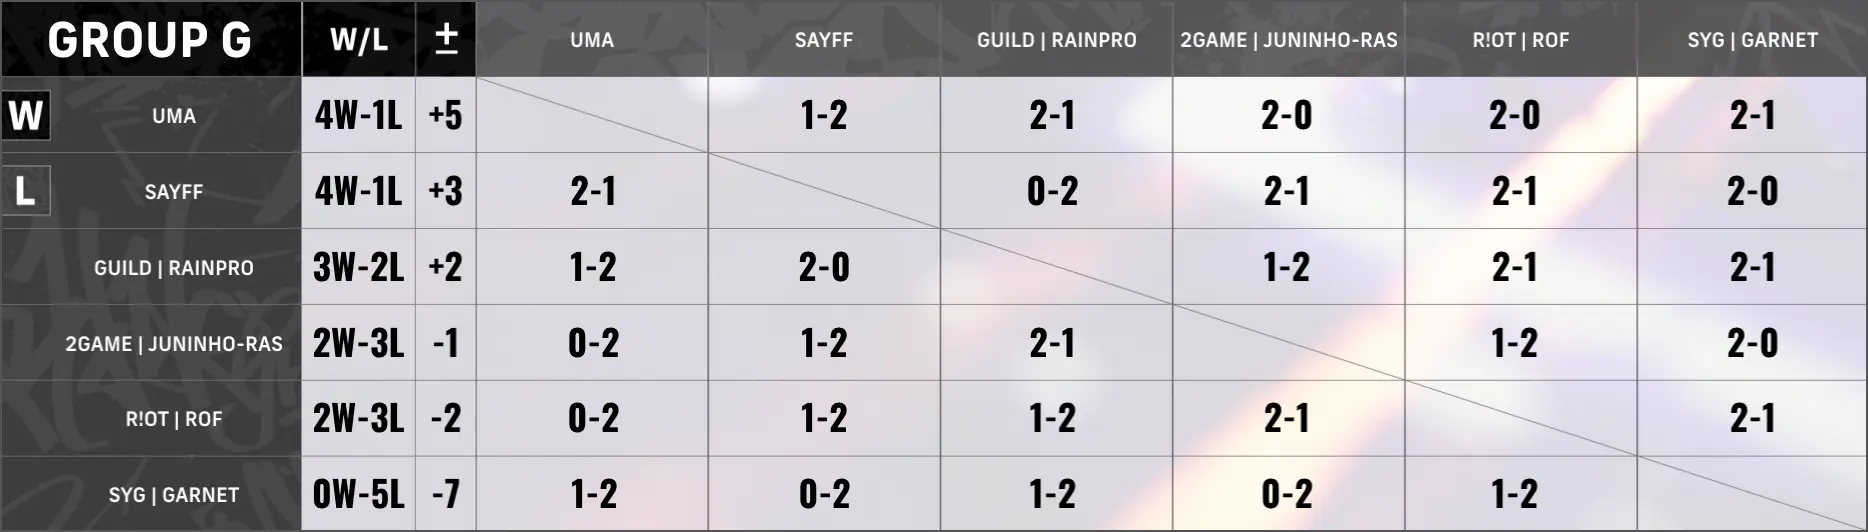 GROUP STANDINGS - Group G - Day 3